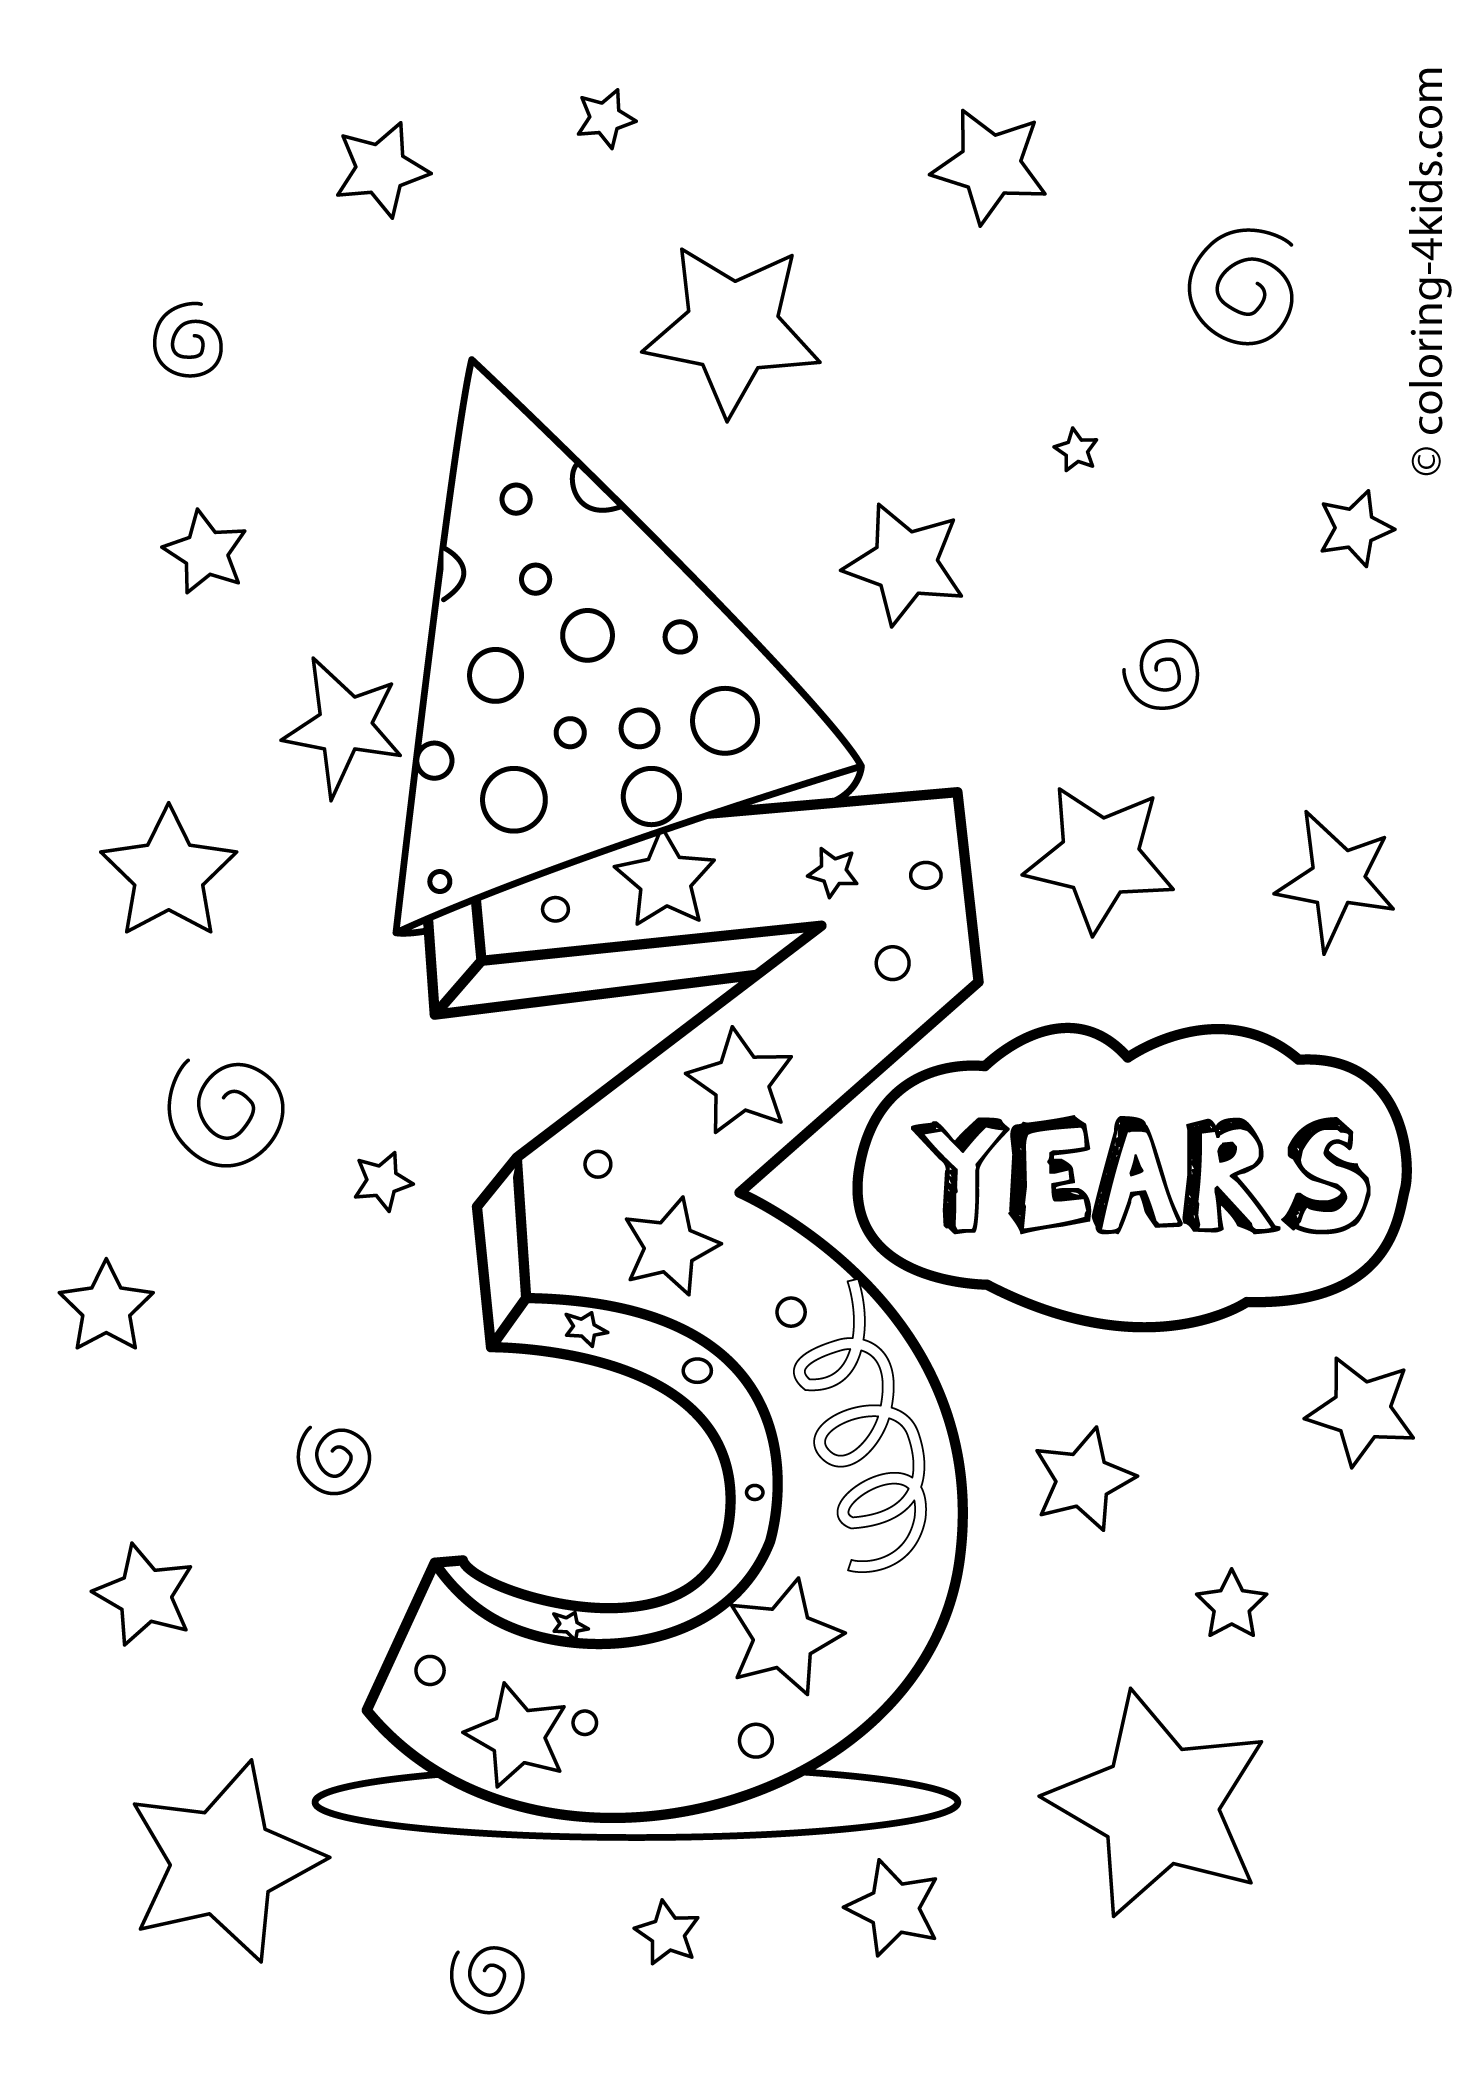 printable coloring sheets for 2 year olds printable worksheets for 2 year olds printable 360 degree coloring sheets for olds year 2 printable 